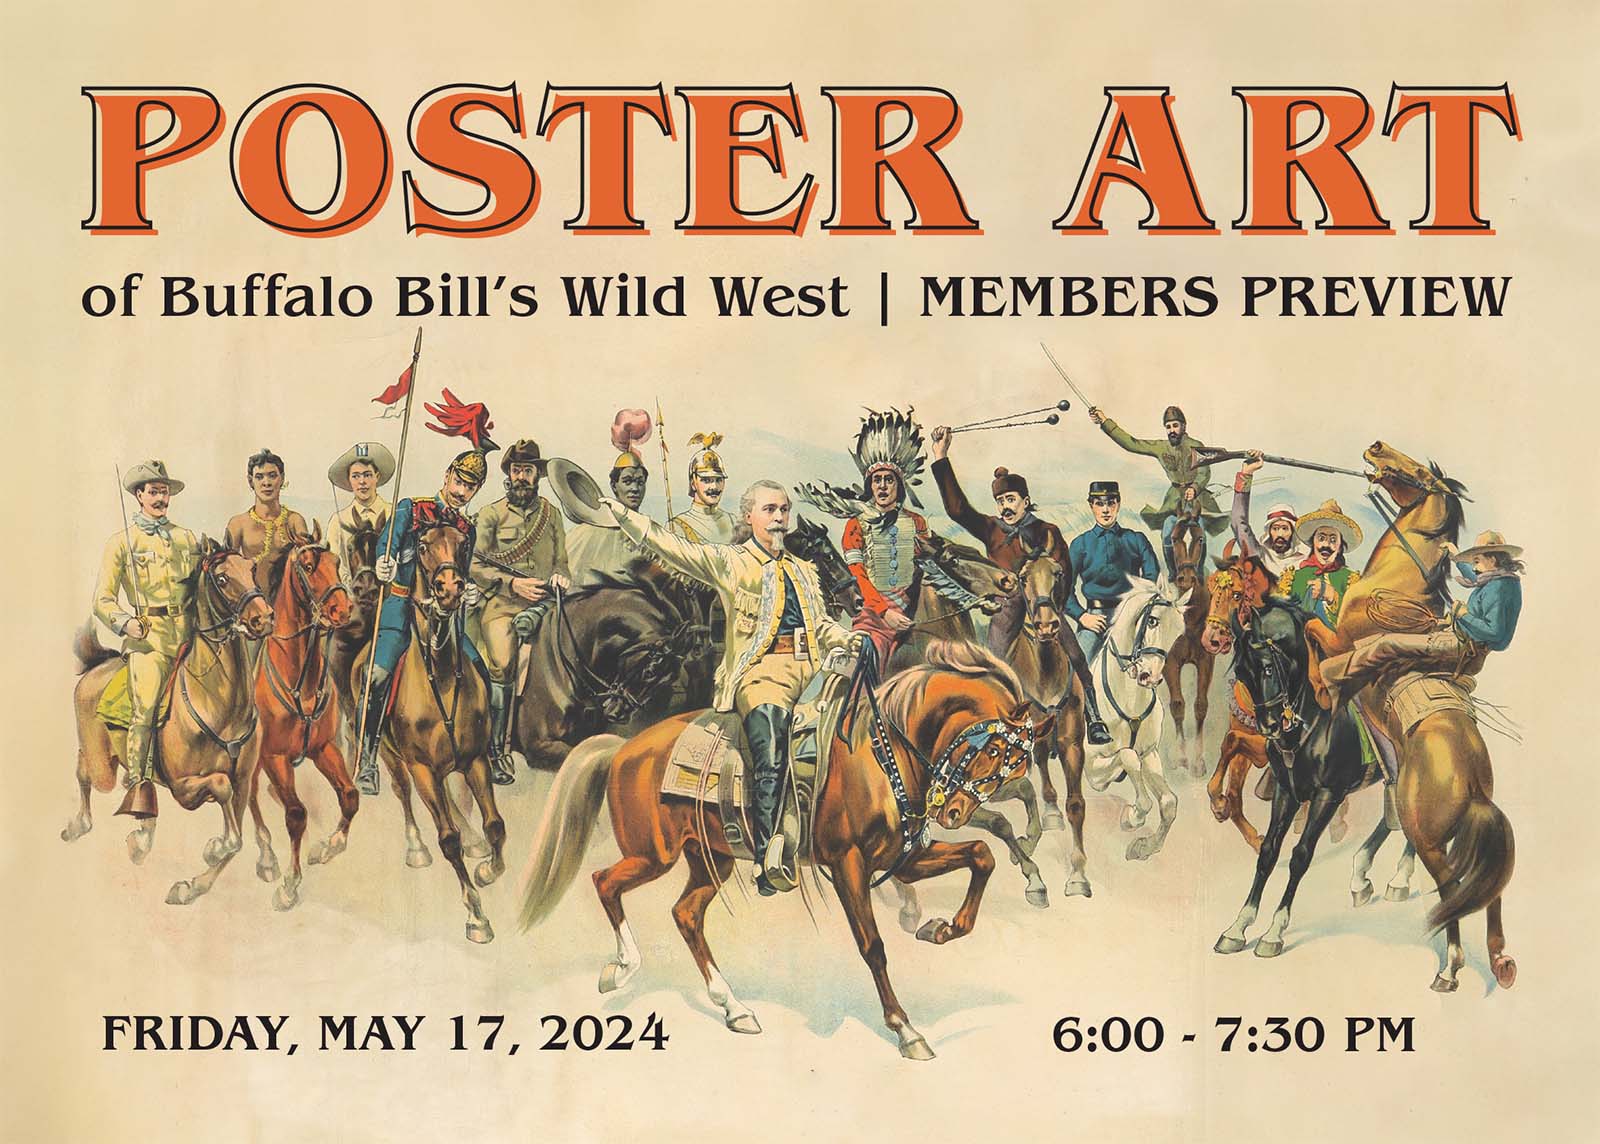 Illustration of Buffalo Bill on horseback in fringed jacket, with diverse cast members of Buffalo Bill's Wild West. Text reads "Poster Art of Buffalo Bill's Wild West Members Preview, Friday, May 17, 2024, 6:00 - 7:30 p.m."